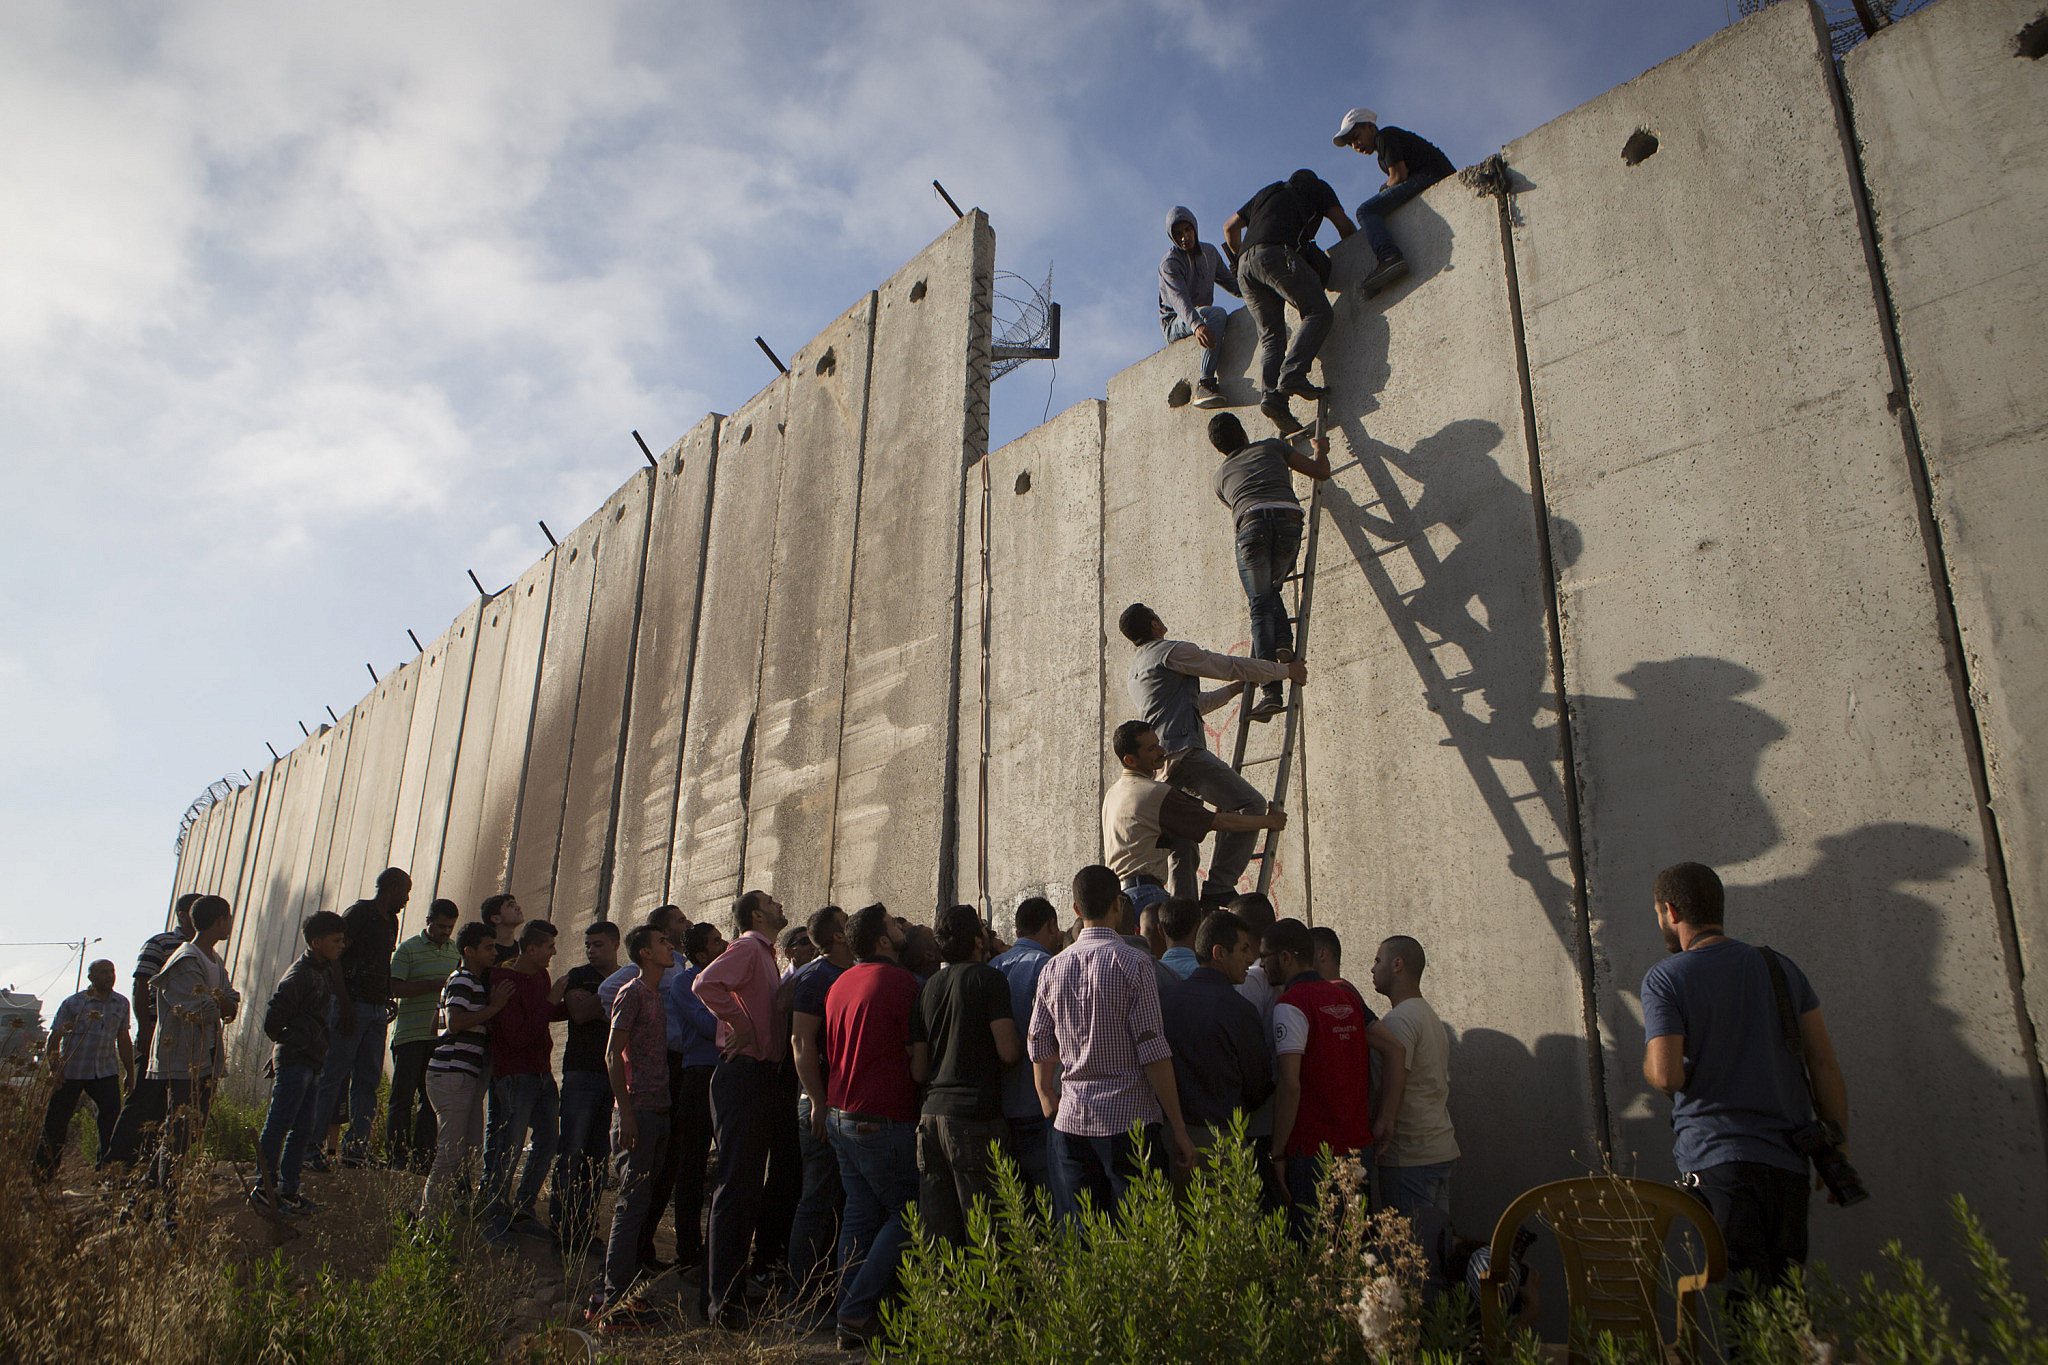 Palestinians climb over the Israeli Separation Wall to attend the Friday prayer in Al-Aqsa Mosque, in the town of Al-Ram, West Bank, during the Muslim holy month of Ramadan, July 3, 2015. (Oren Ziv/Activestills)